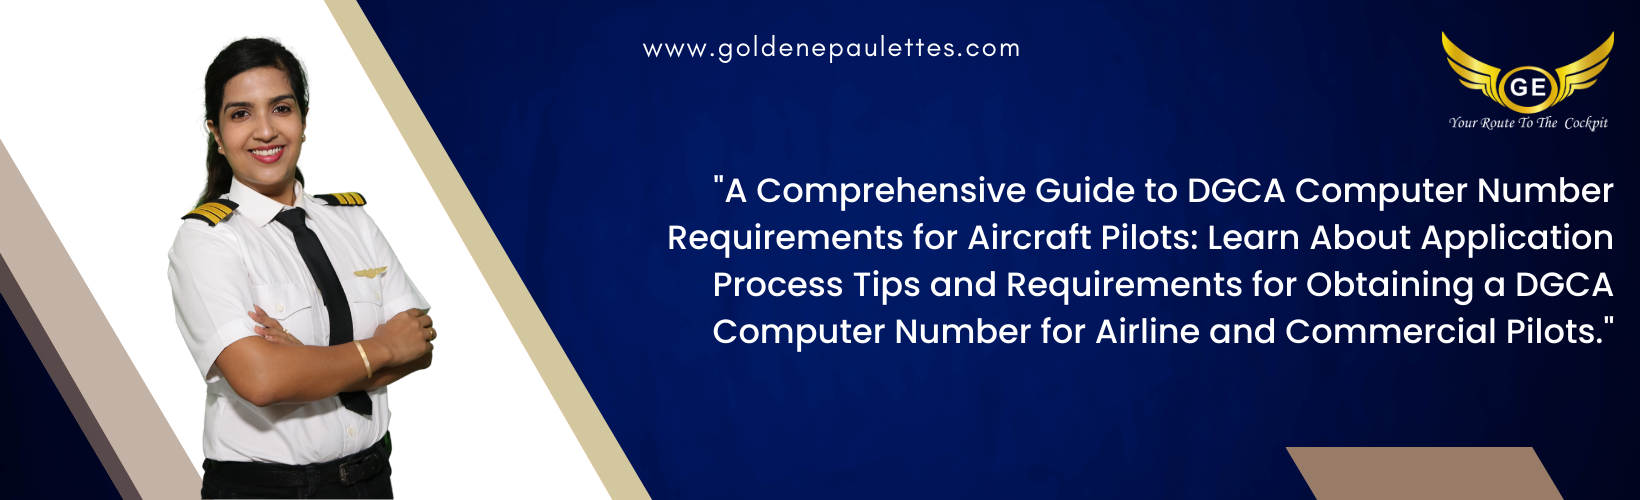 DGCA Computer Number Requirements for Aircraft Pilots